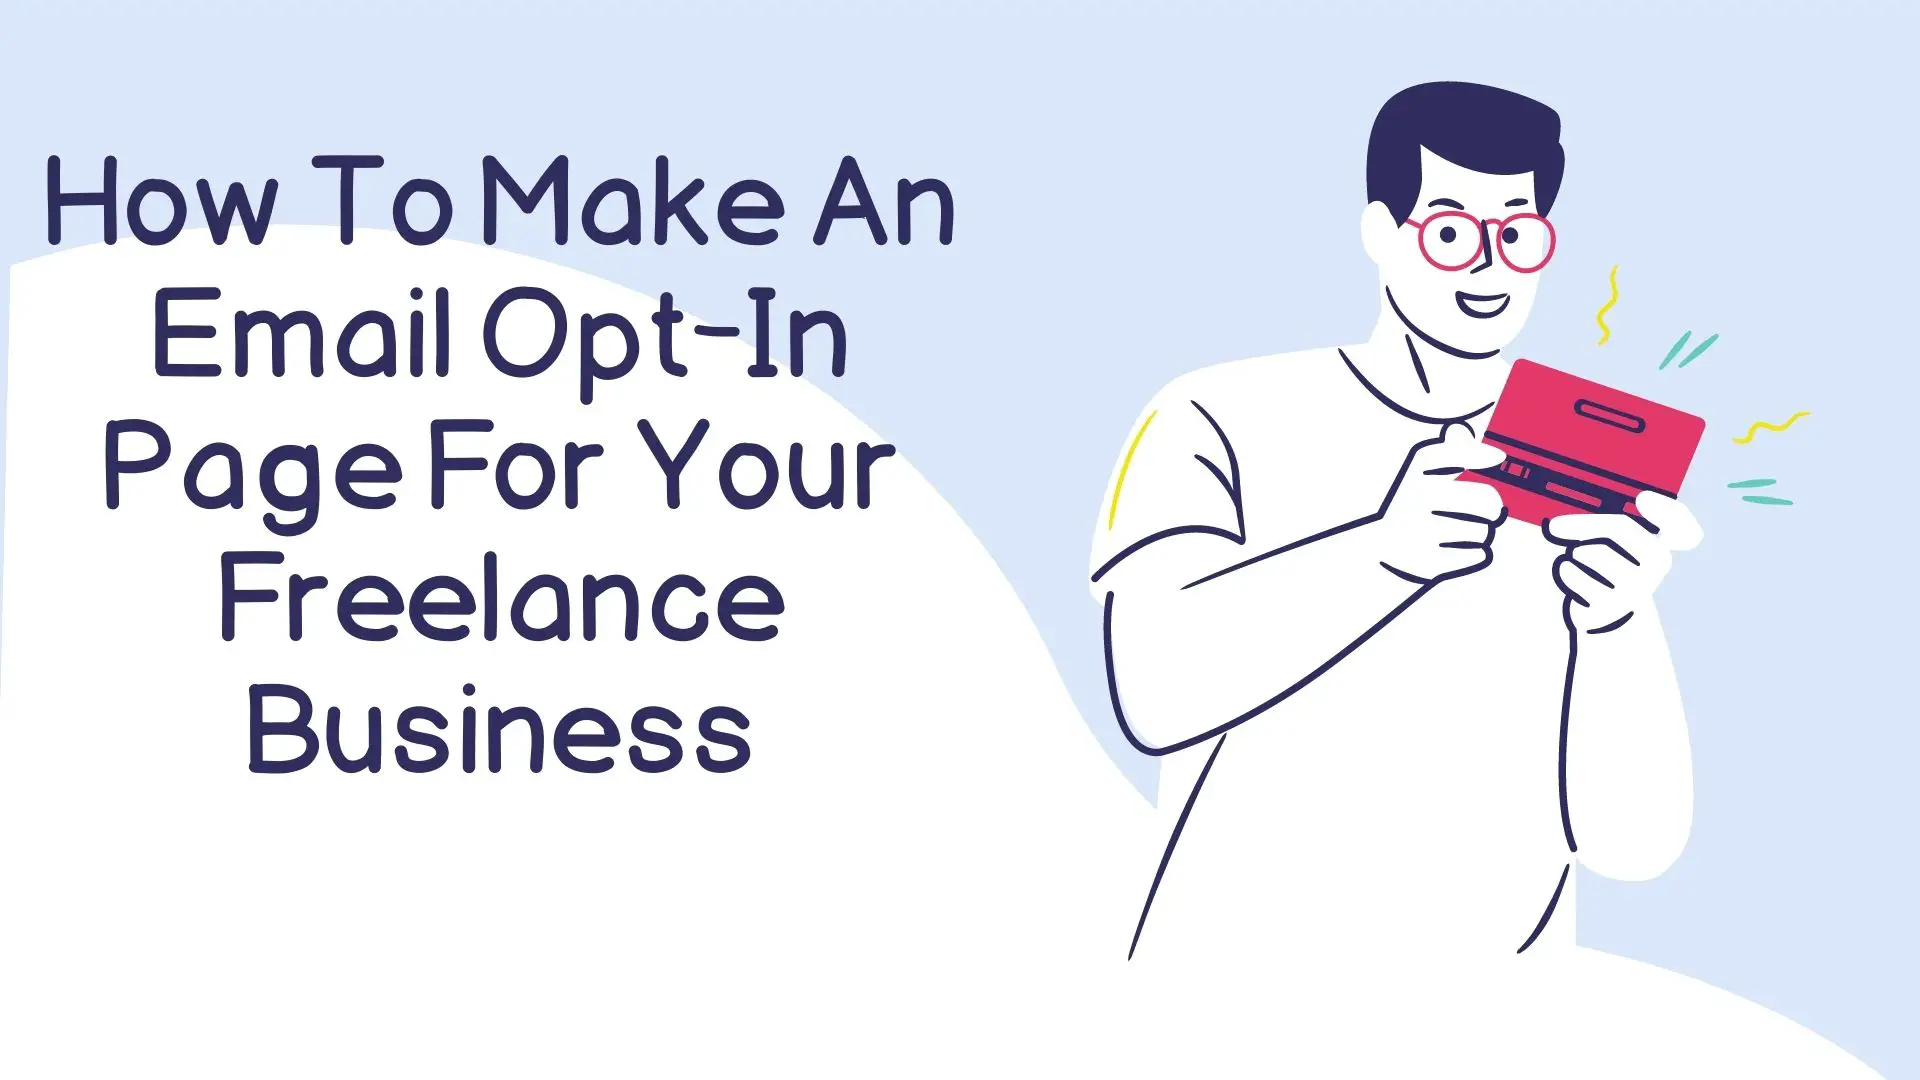 How To Make An Email Opt-In Page For Your Freelance Business